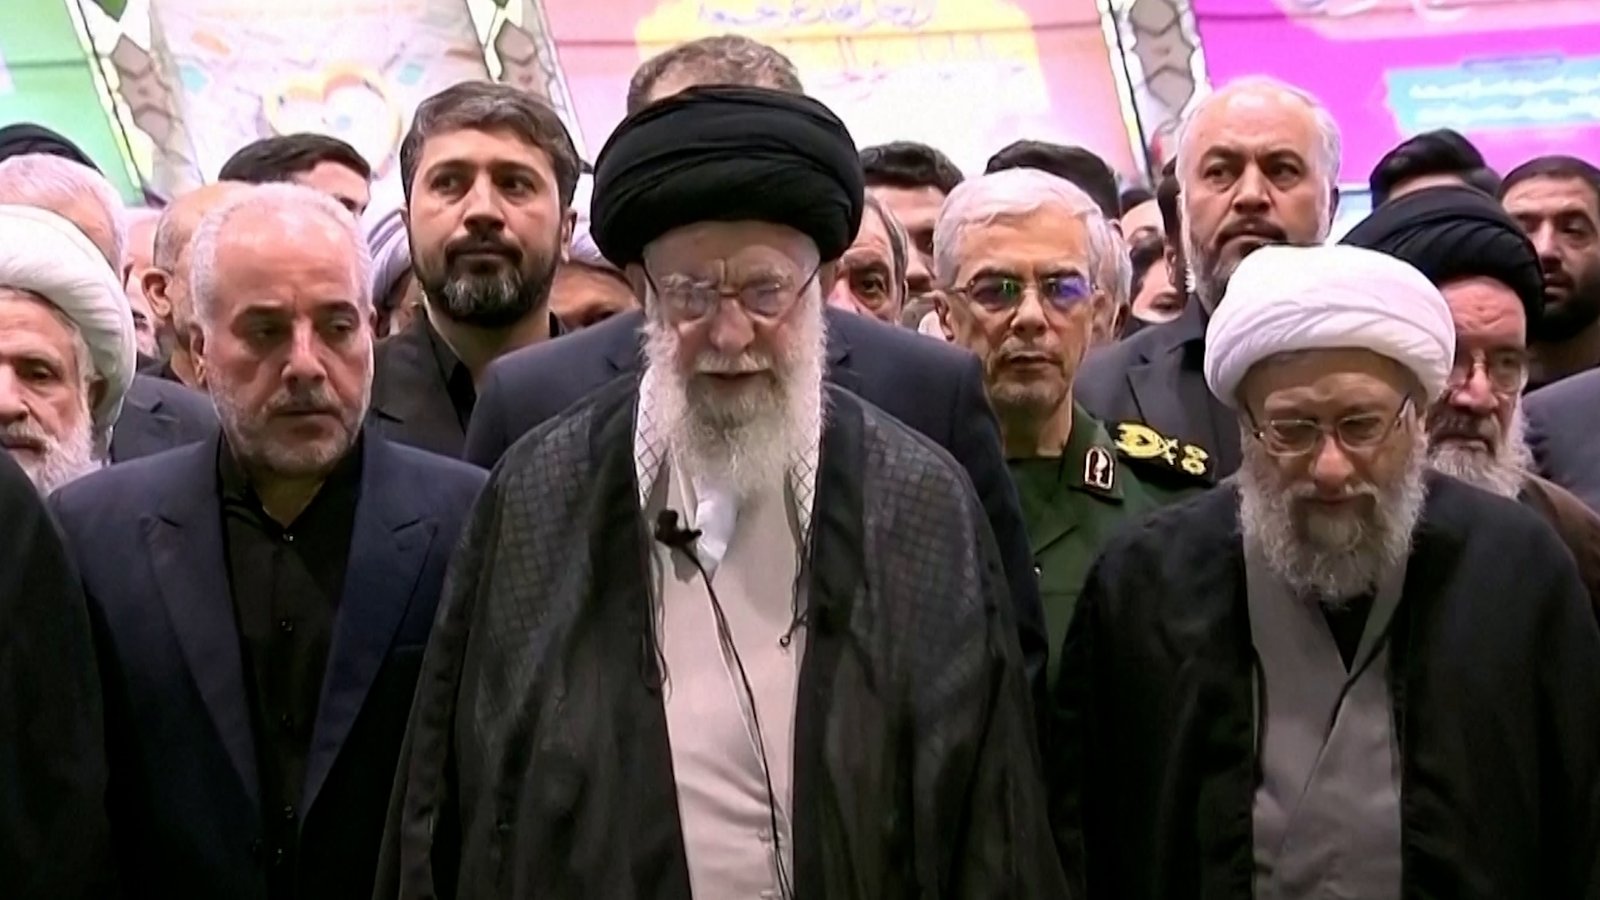 Iran’s Supreme Leader leads funeral prayers for president | Religion